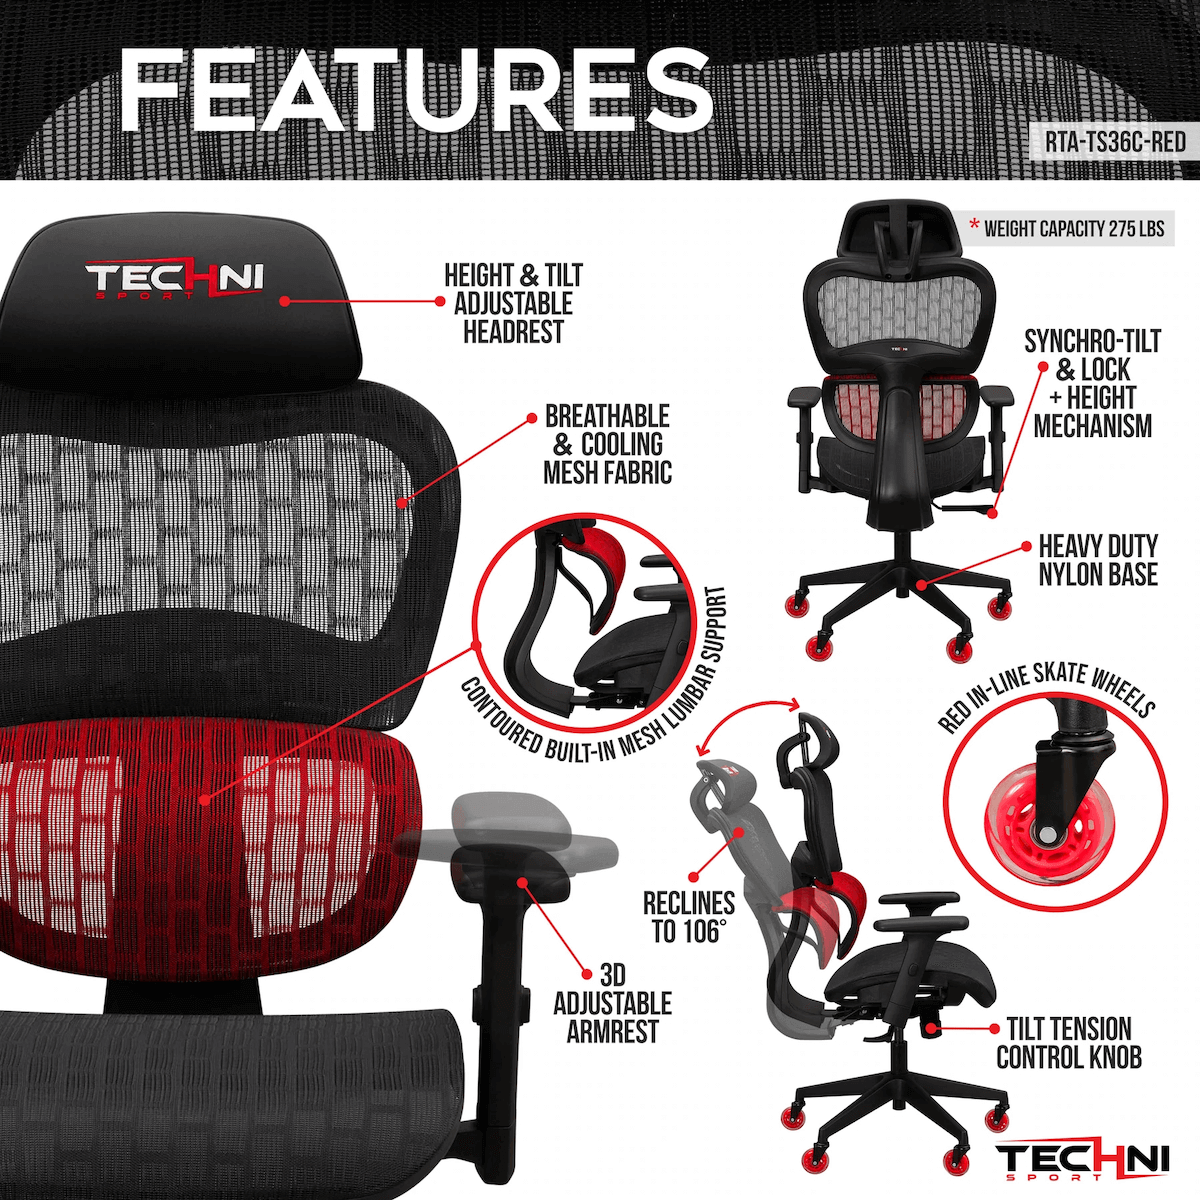 Techni Sport TS36C Airflex Cool Mesh Gaming Chair Features RTA-TS36C-RED